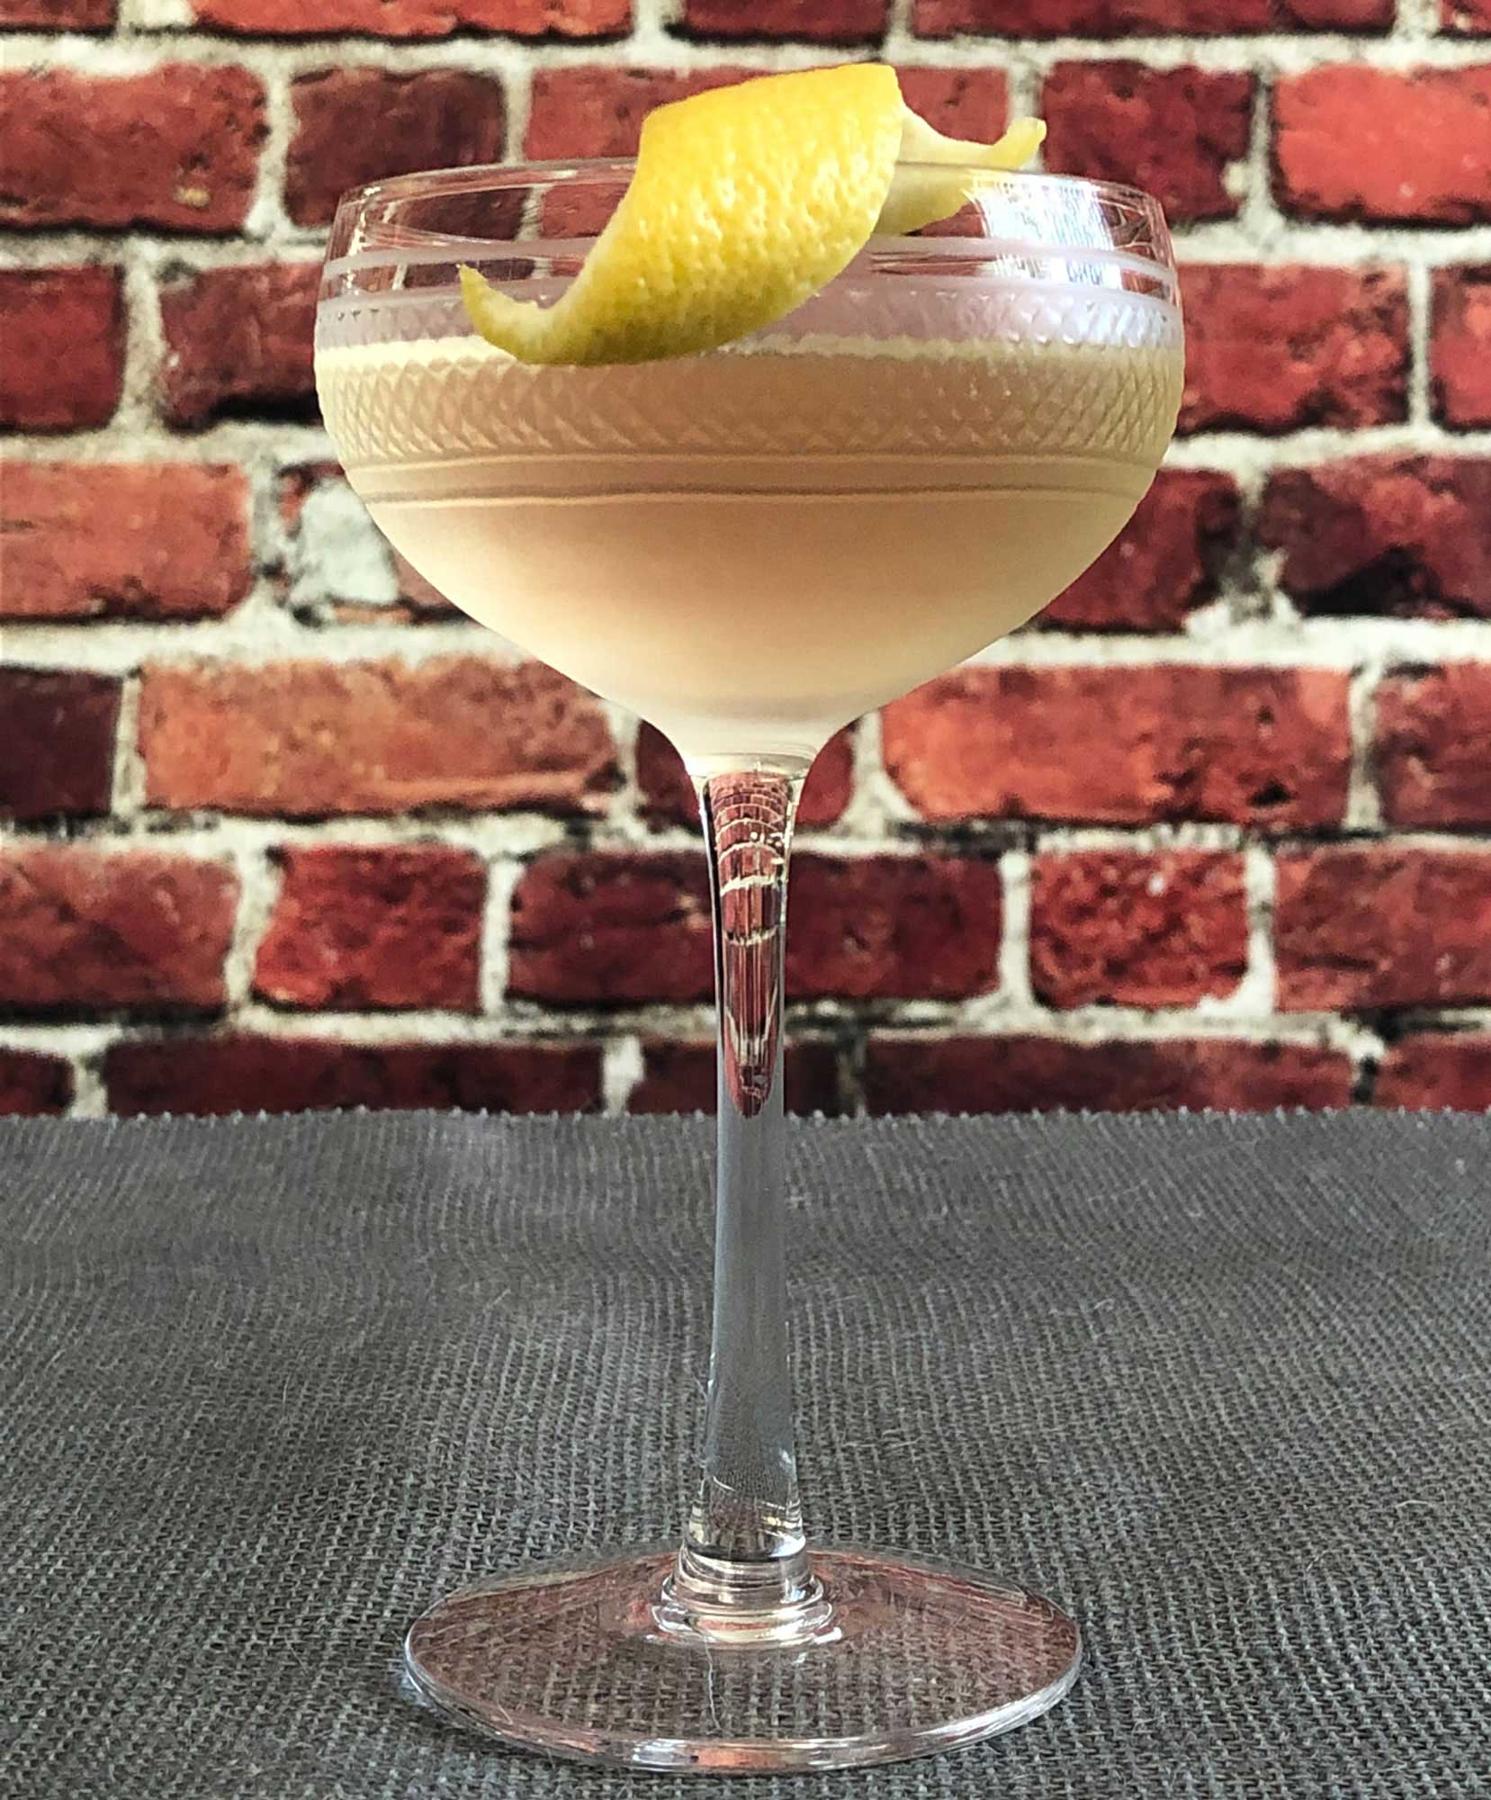 An example of the Eddie Brown, the mixed drink (drink), adapted from the Savoy Cocktail Book, featuring Hayman’s Old Tom Gin, Cocchi Americano Bianco, Blume Marillen Apricot Eau-de-Vie, simple syrup, and lemon twist; photo by Lee Edwards